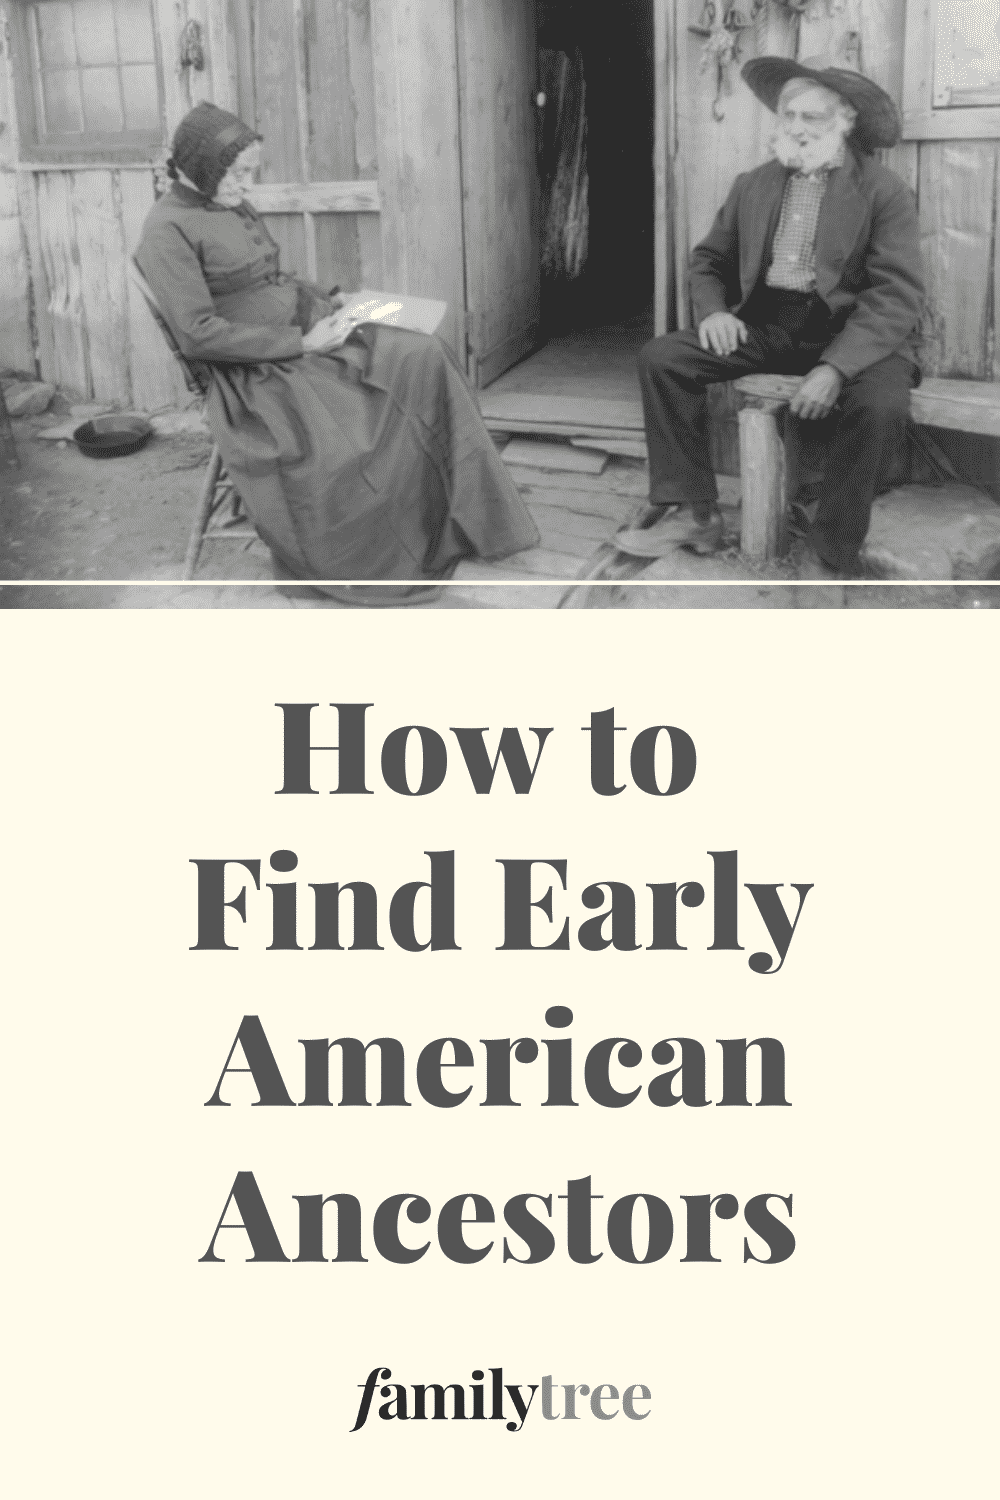 How to Find Early American Ancestors